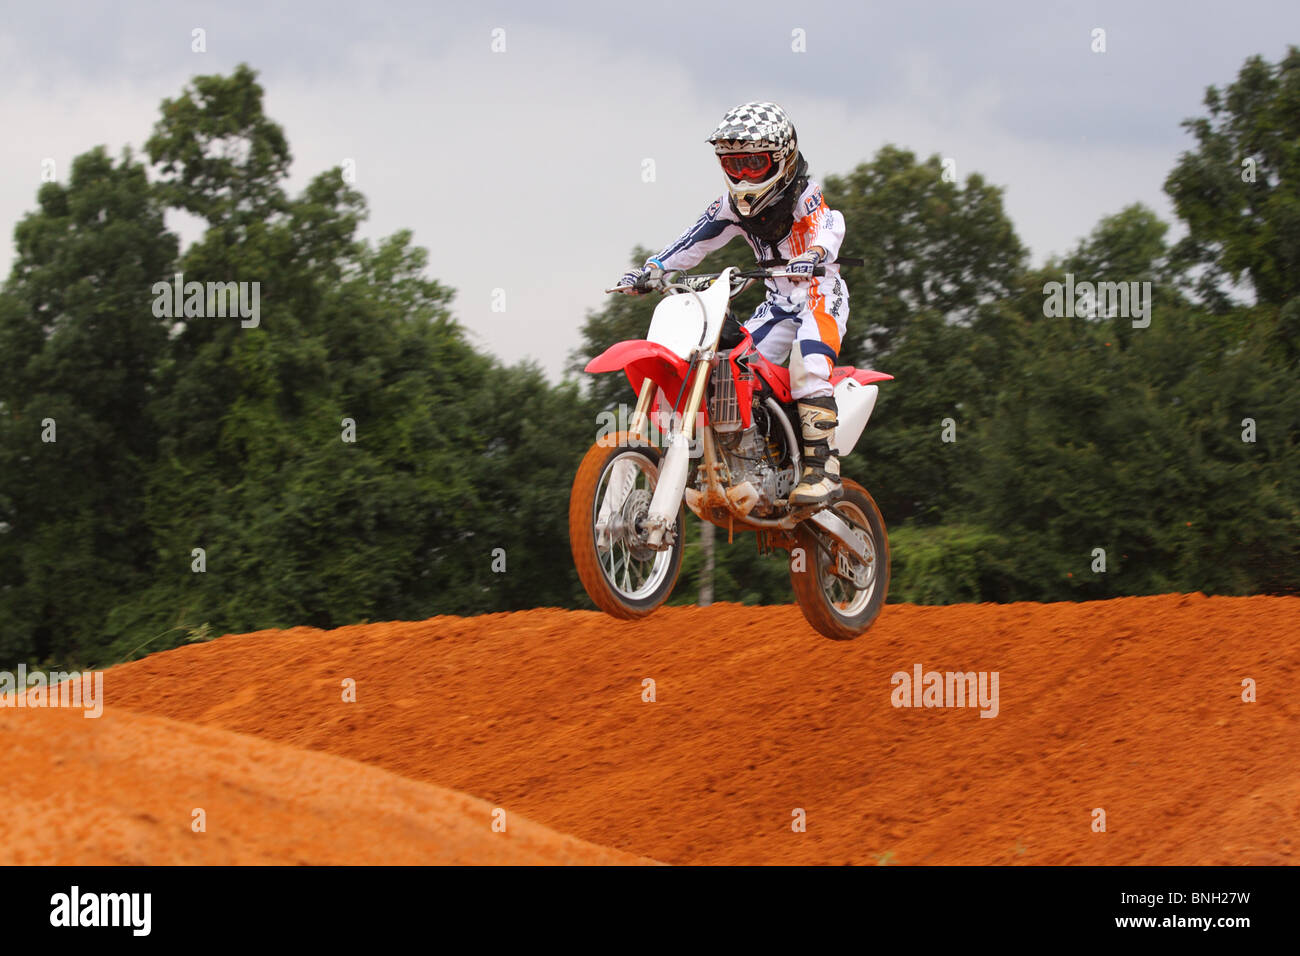 motorcycle rider on a dirt bike running a motocross track Stock Photo